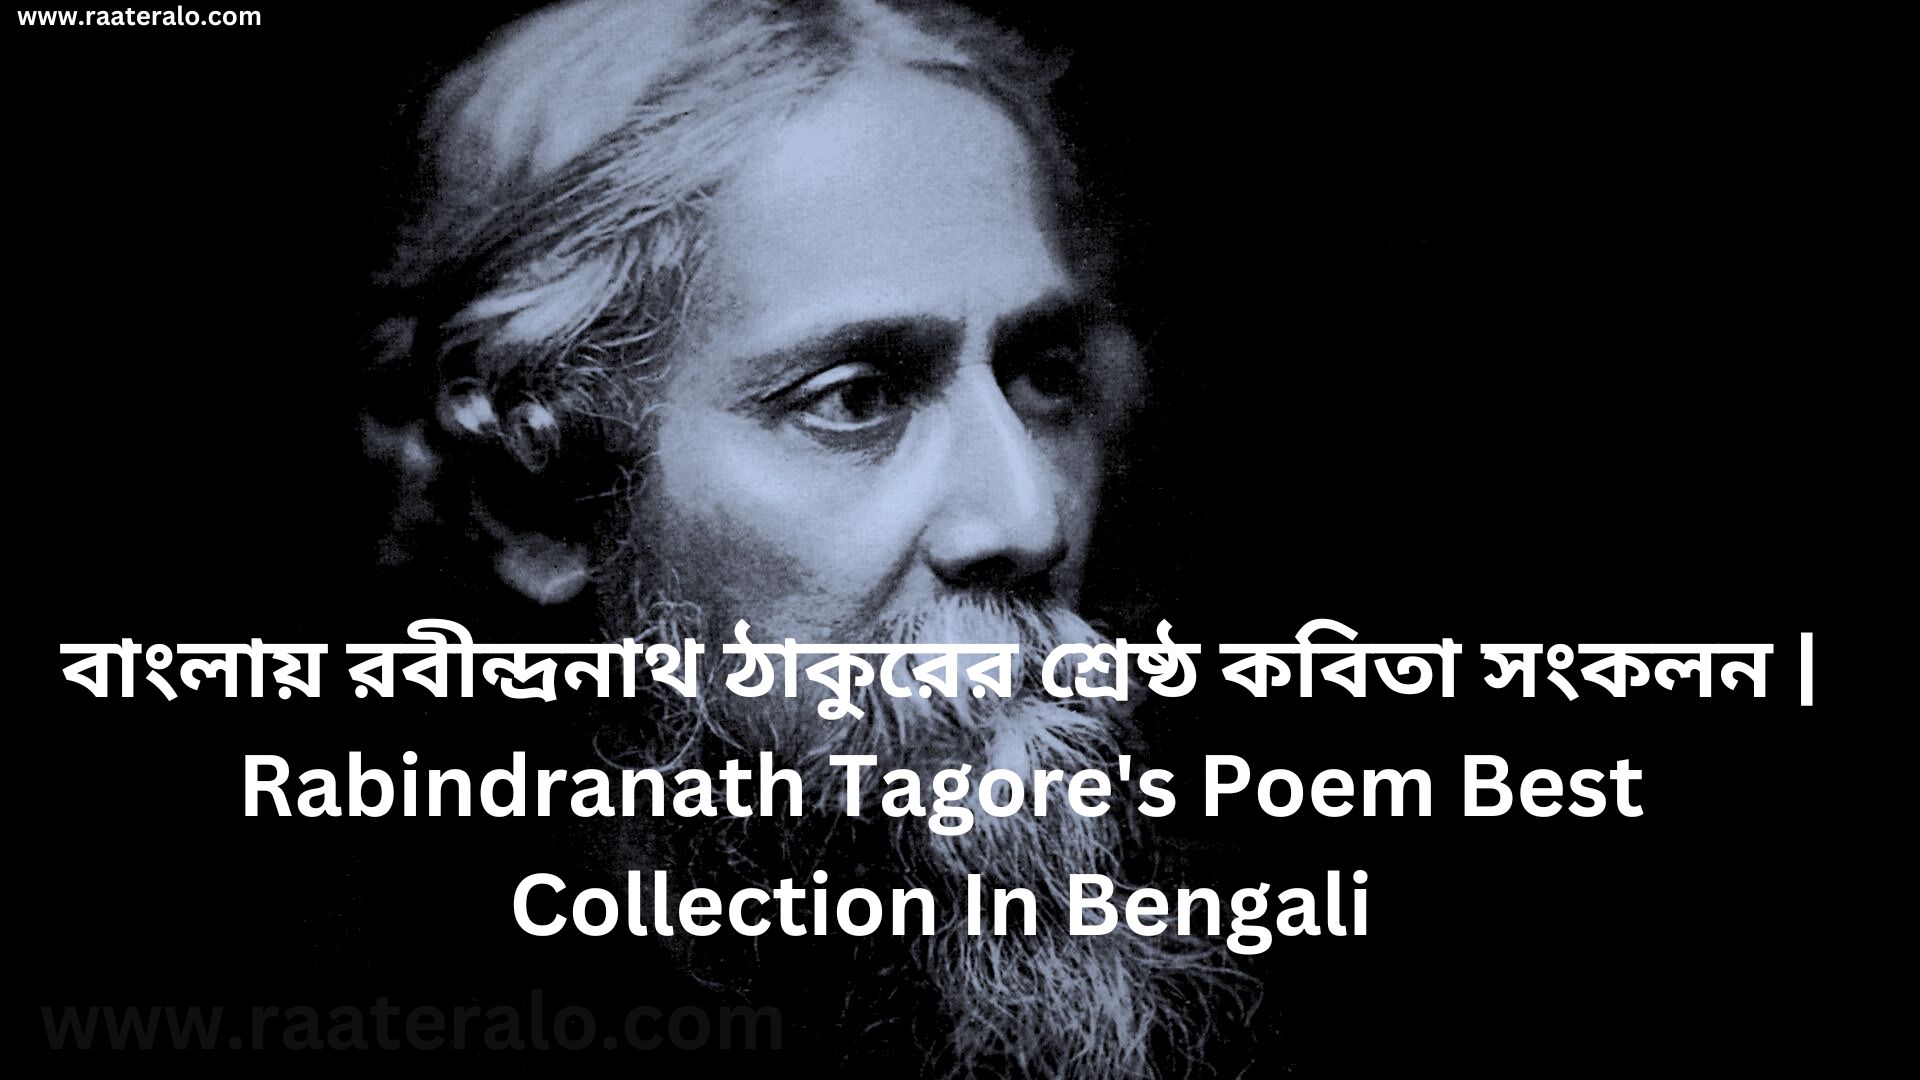 Rabindranath Tagore's Poem Best Collection In Bengali